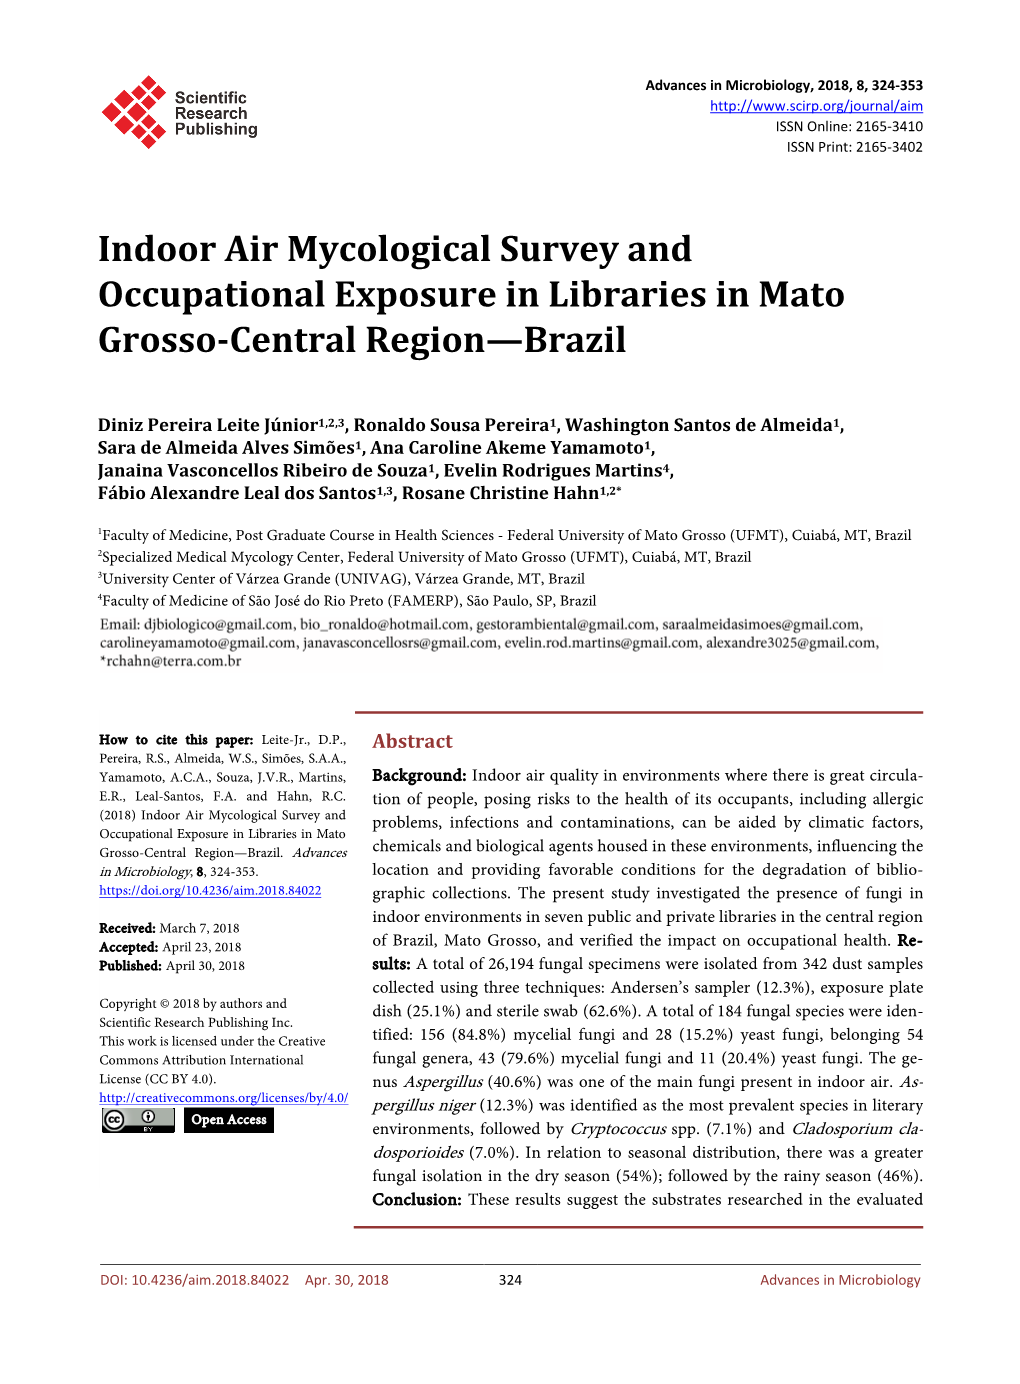 Indoor Air Mycological Survey and Occupational Exposure in Libraries in Mato Grosso-Central Region—Brazil